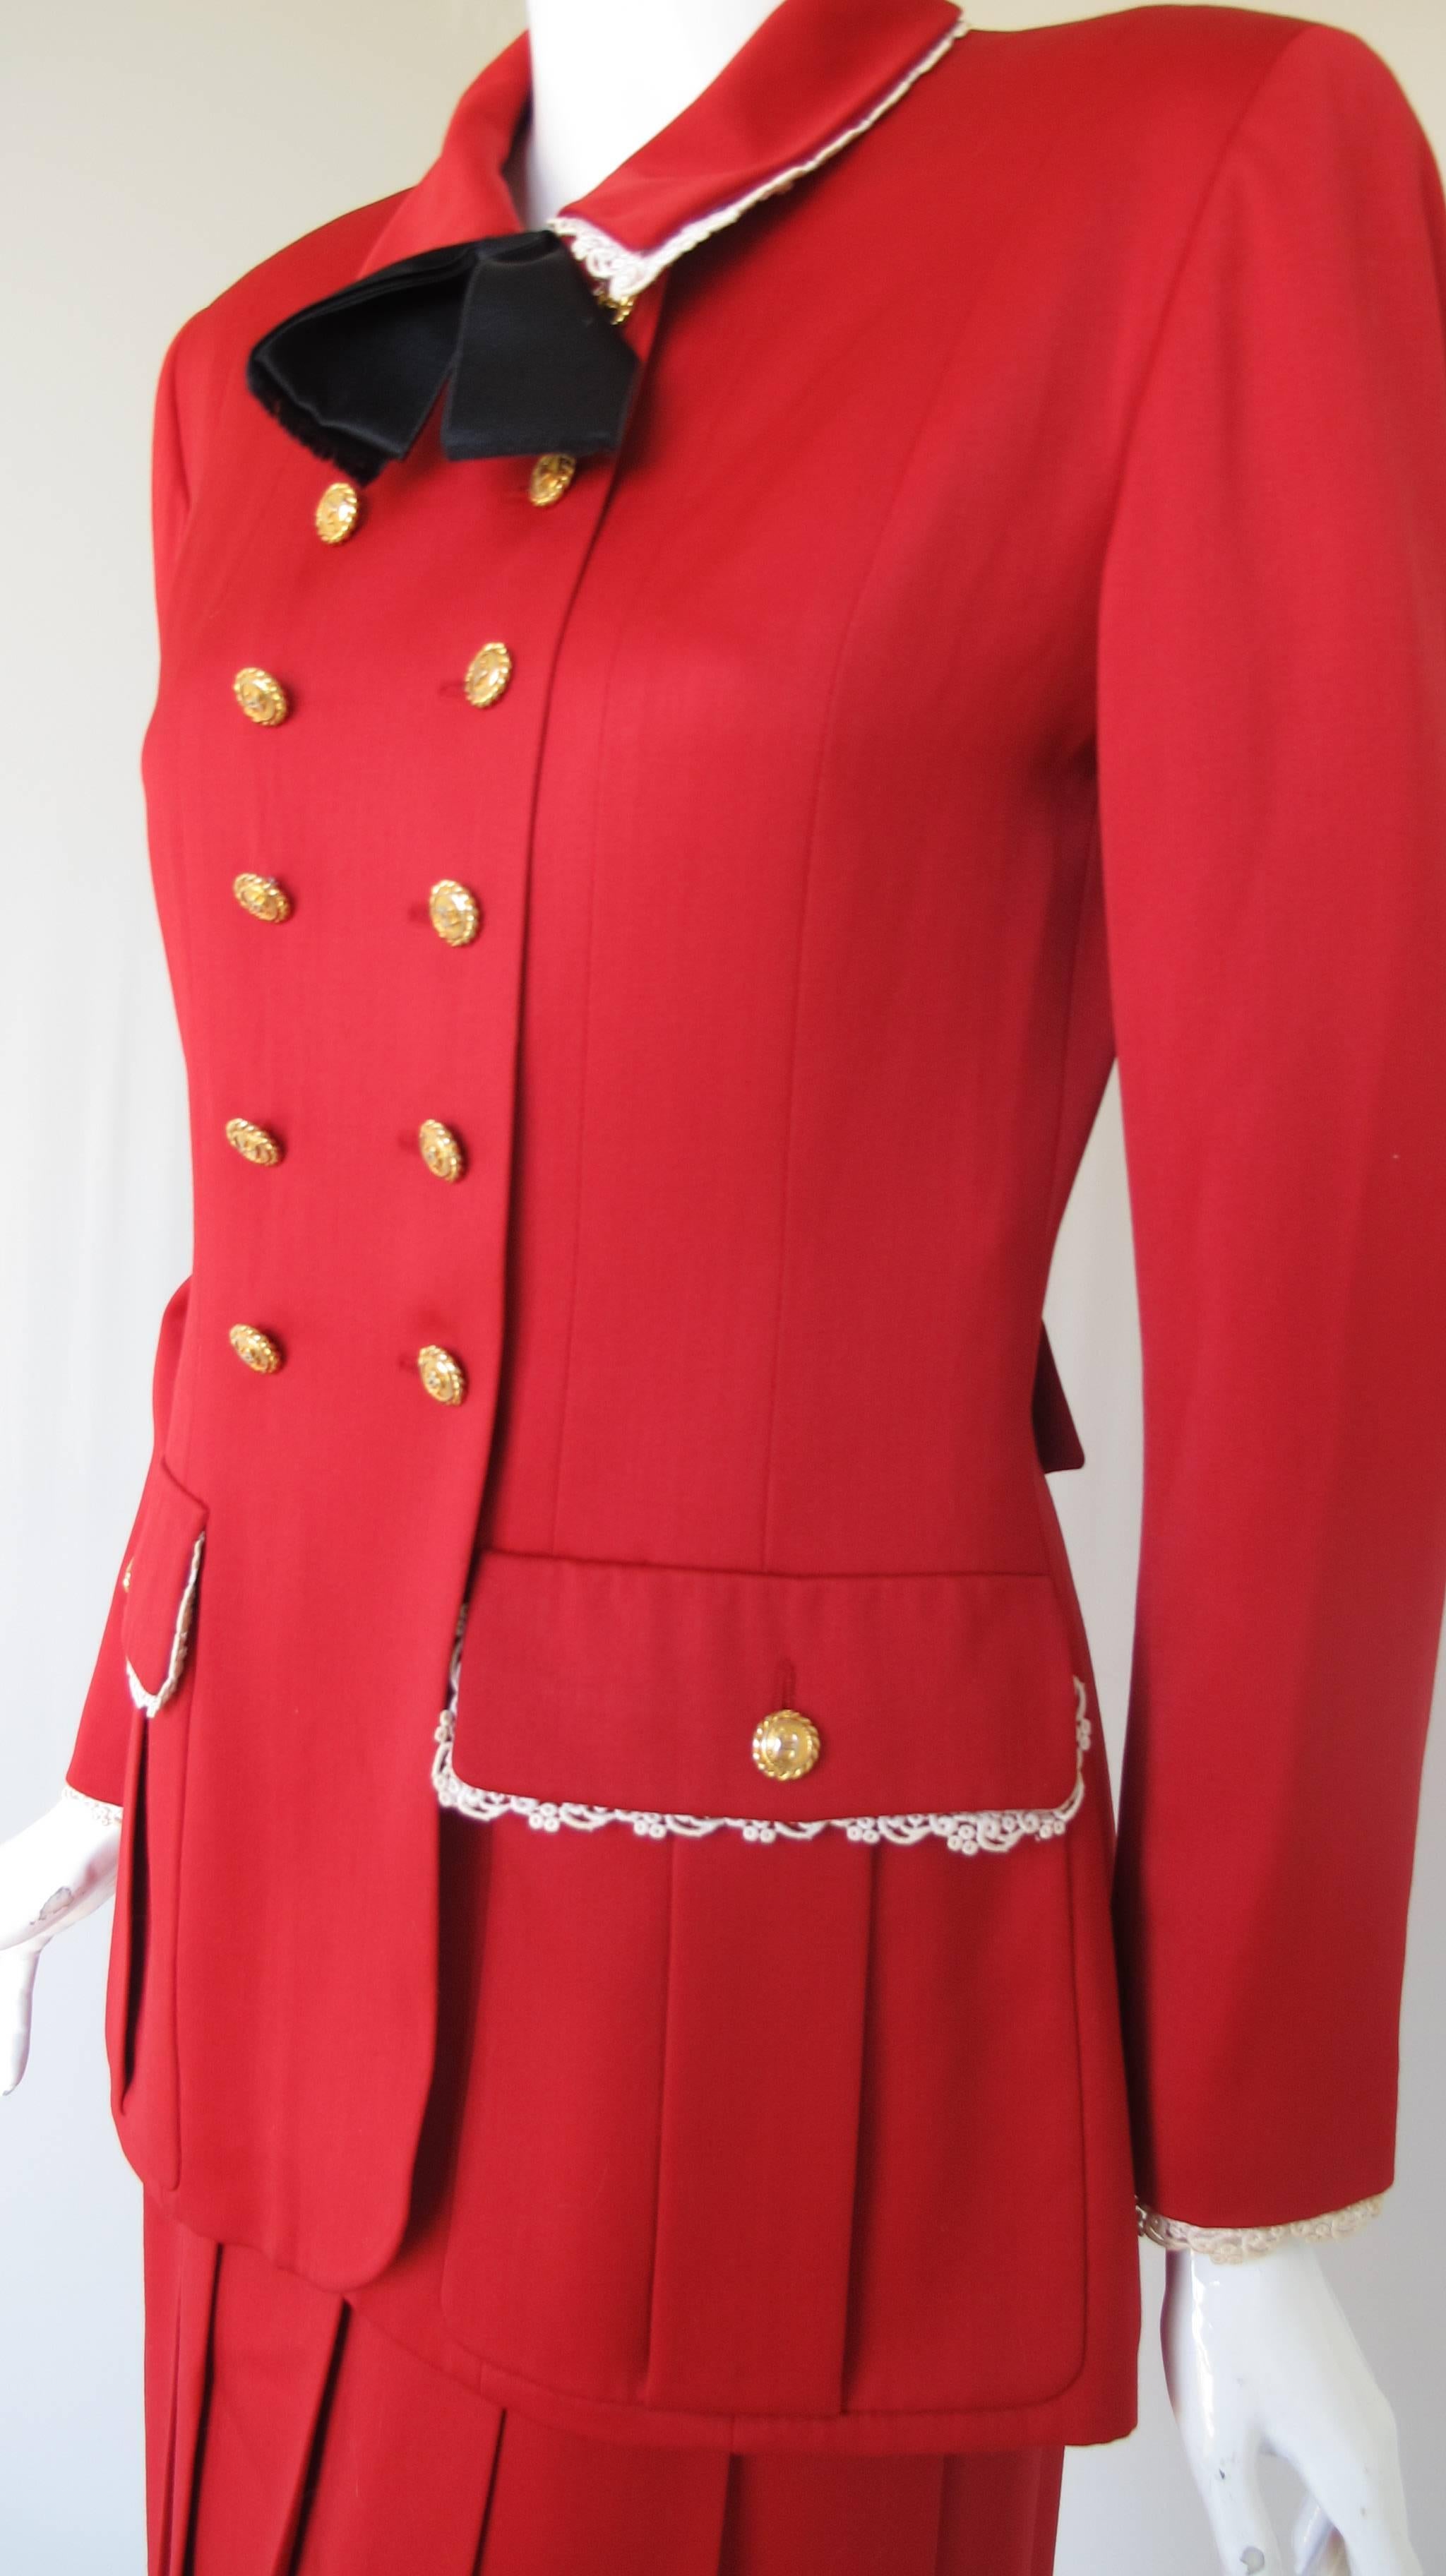 A vintage Chanel red summer wool suit comprised of a jacket and drop pleated skirt. The jacket is lined with CC logo silk and trimmed with lace at the collar, cuffs and frontal pockets. Features a silk bow at the neckline and CC logo gold tone